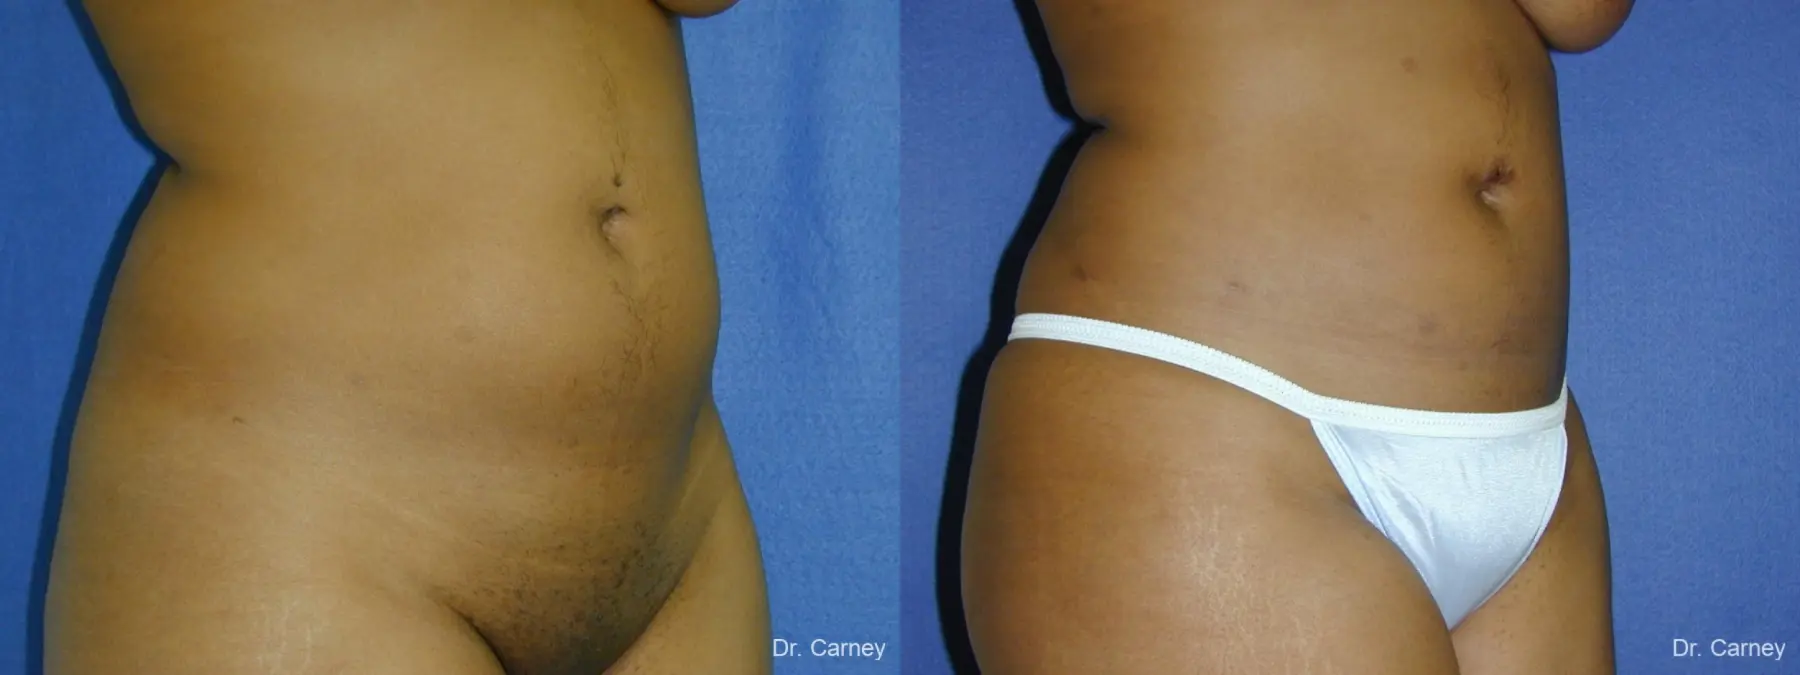 Virginia Beach Liposuction 1283 - Before and After